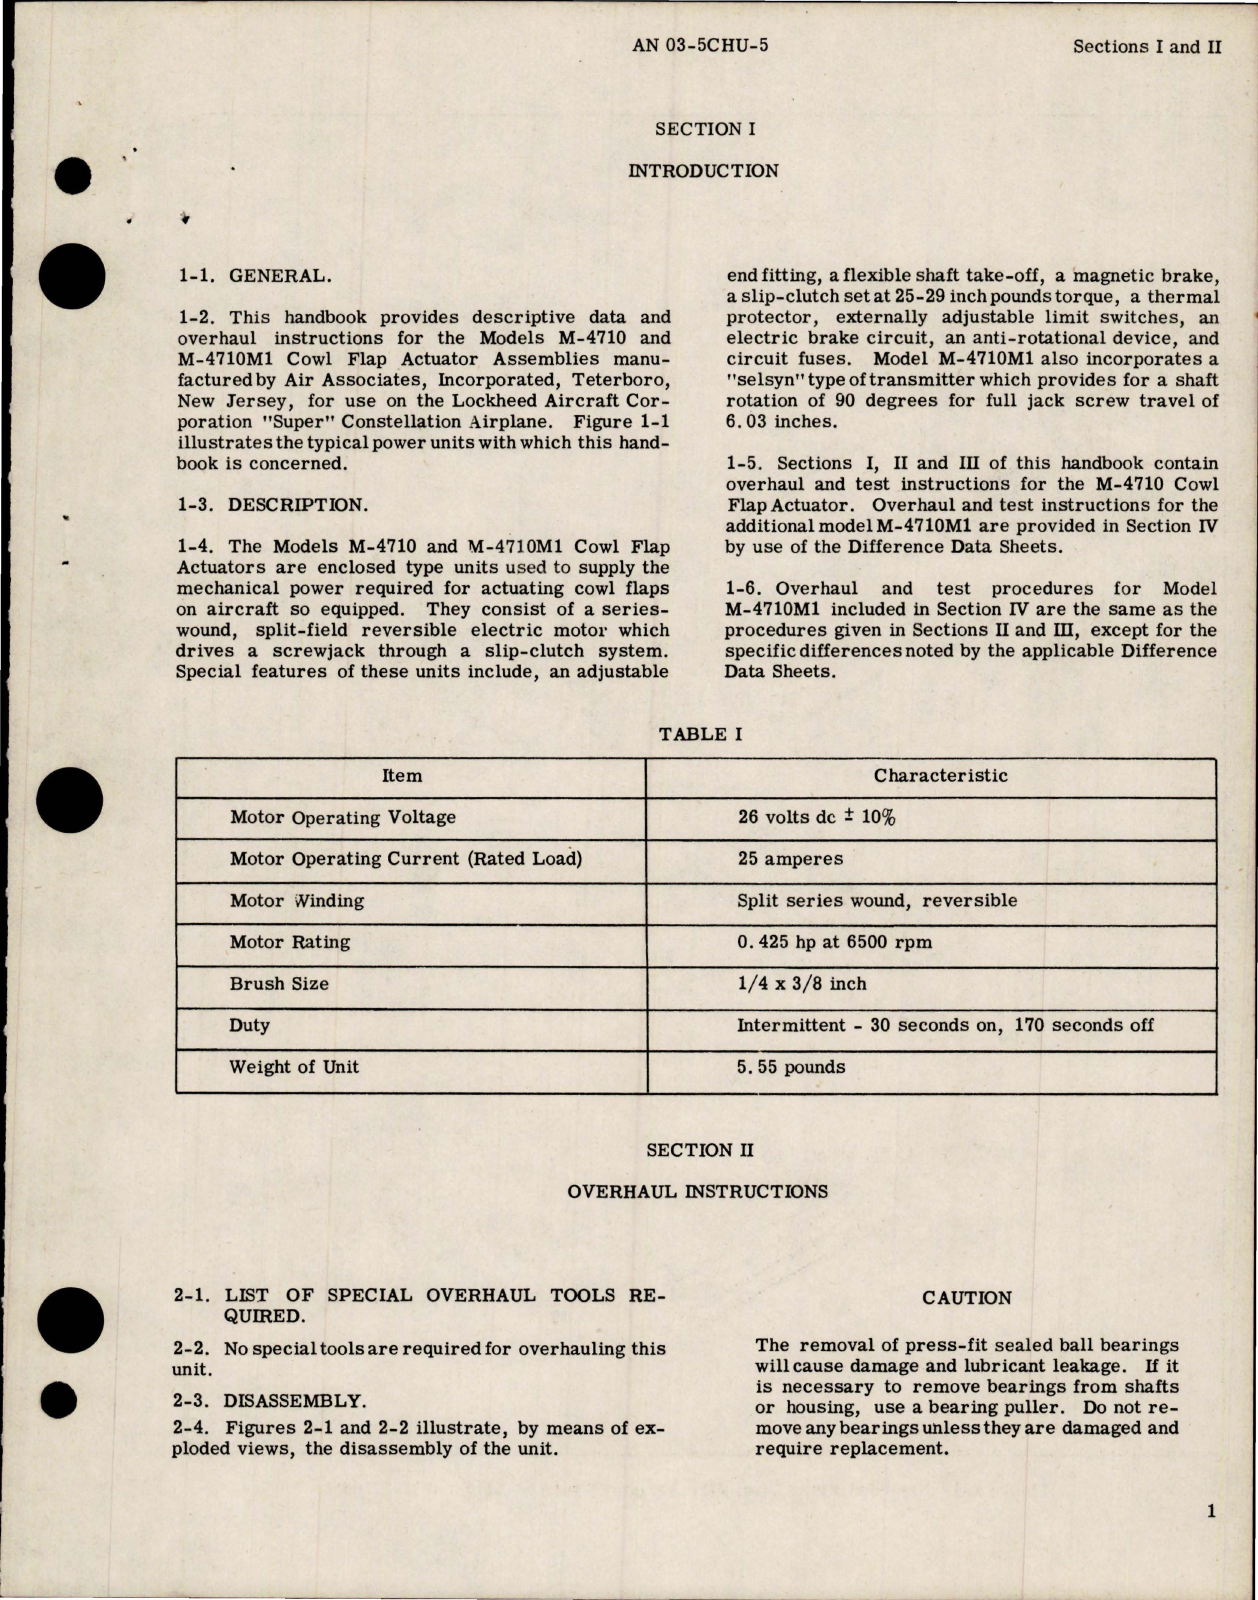 Sample page 5 from AirCorps Library document: Overhaul Instructions for Cowl Flap Actuator - Parts M-4710 and M-4710M1 